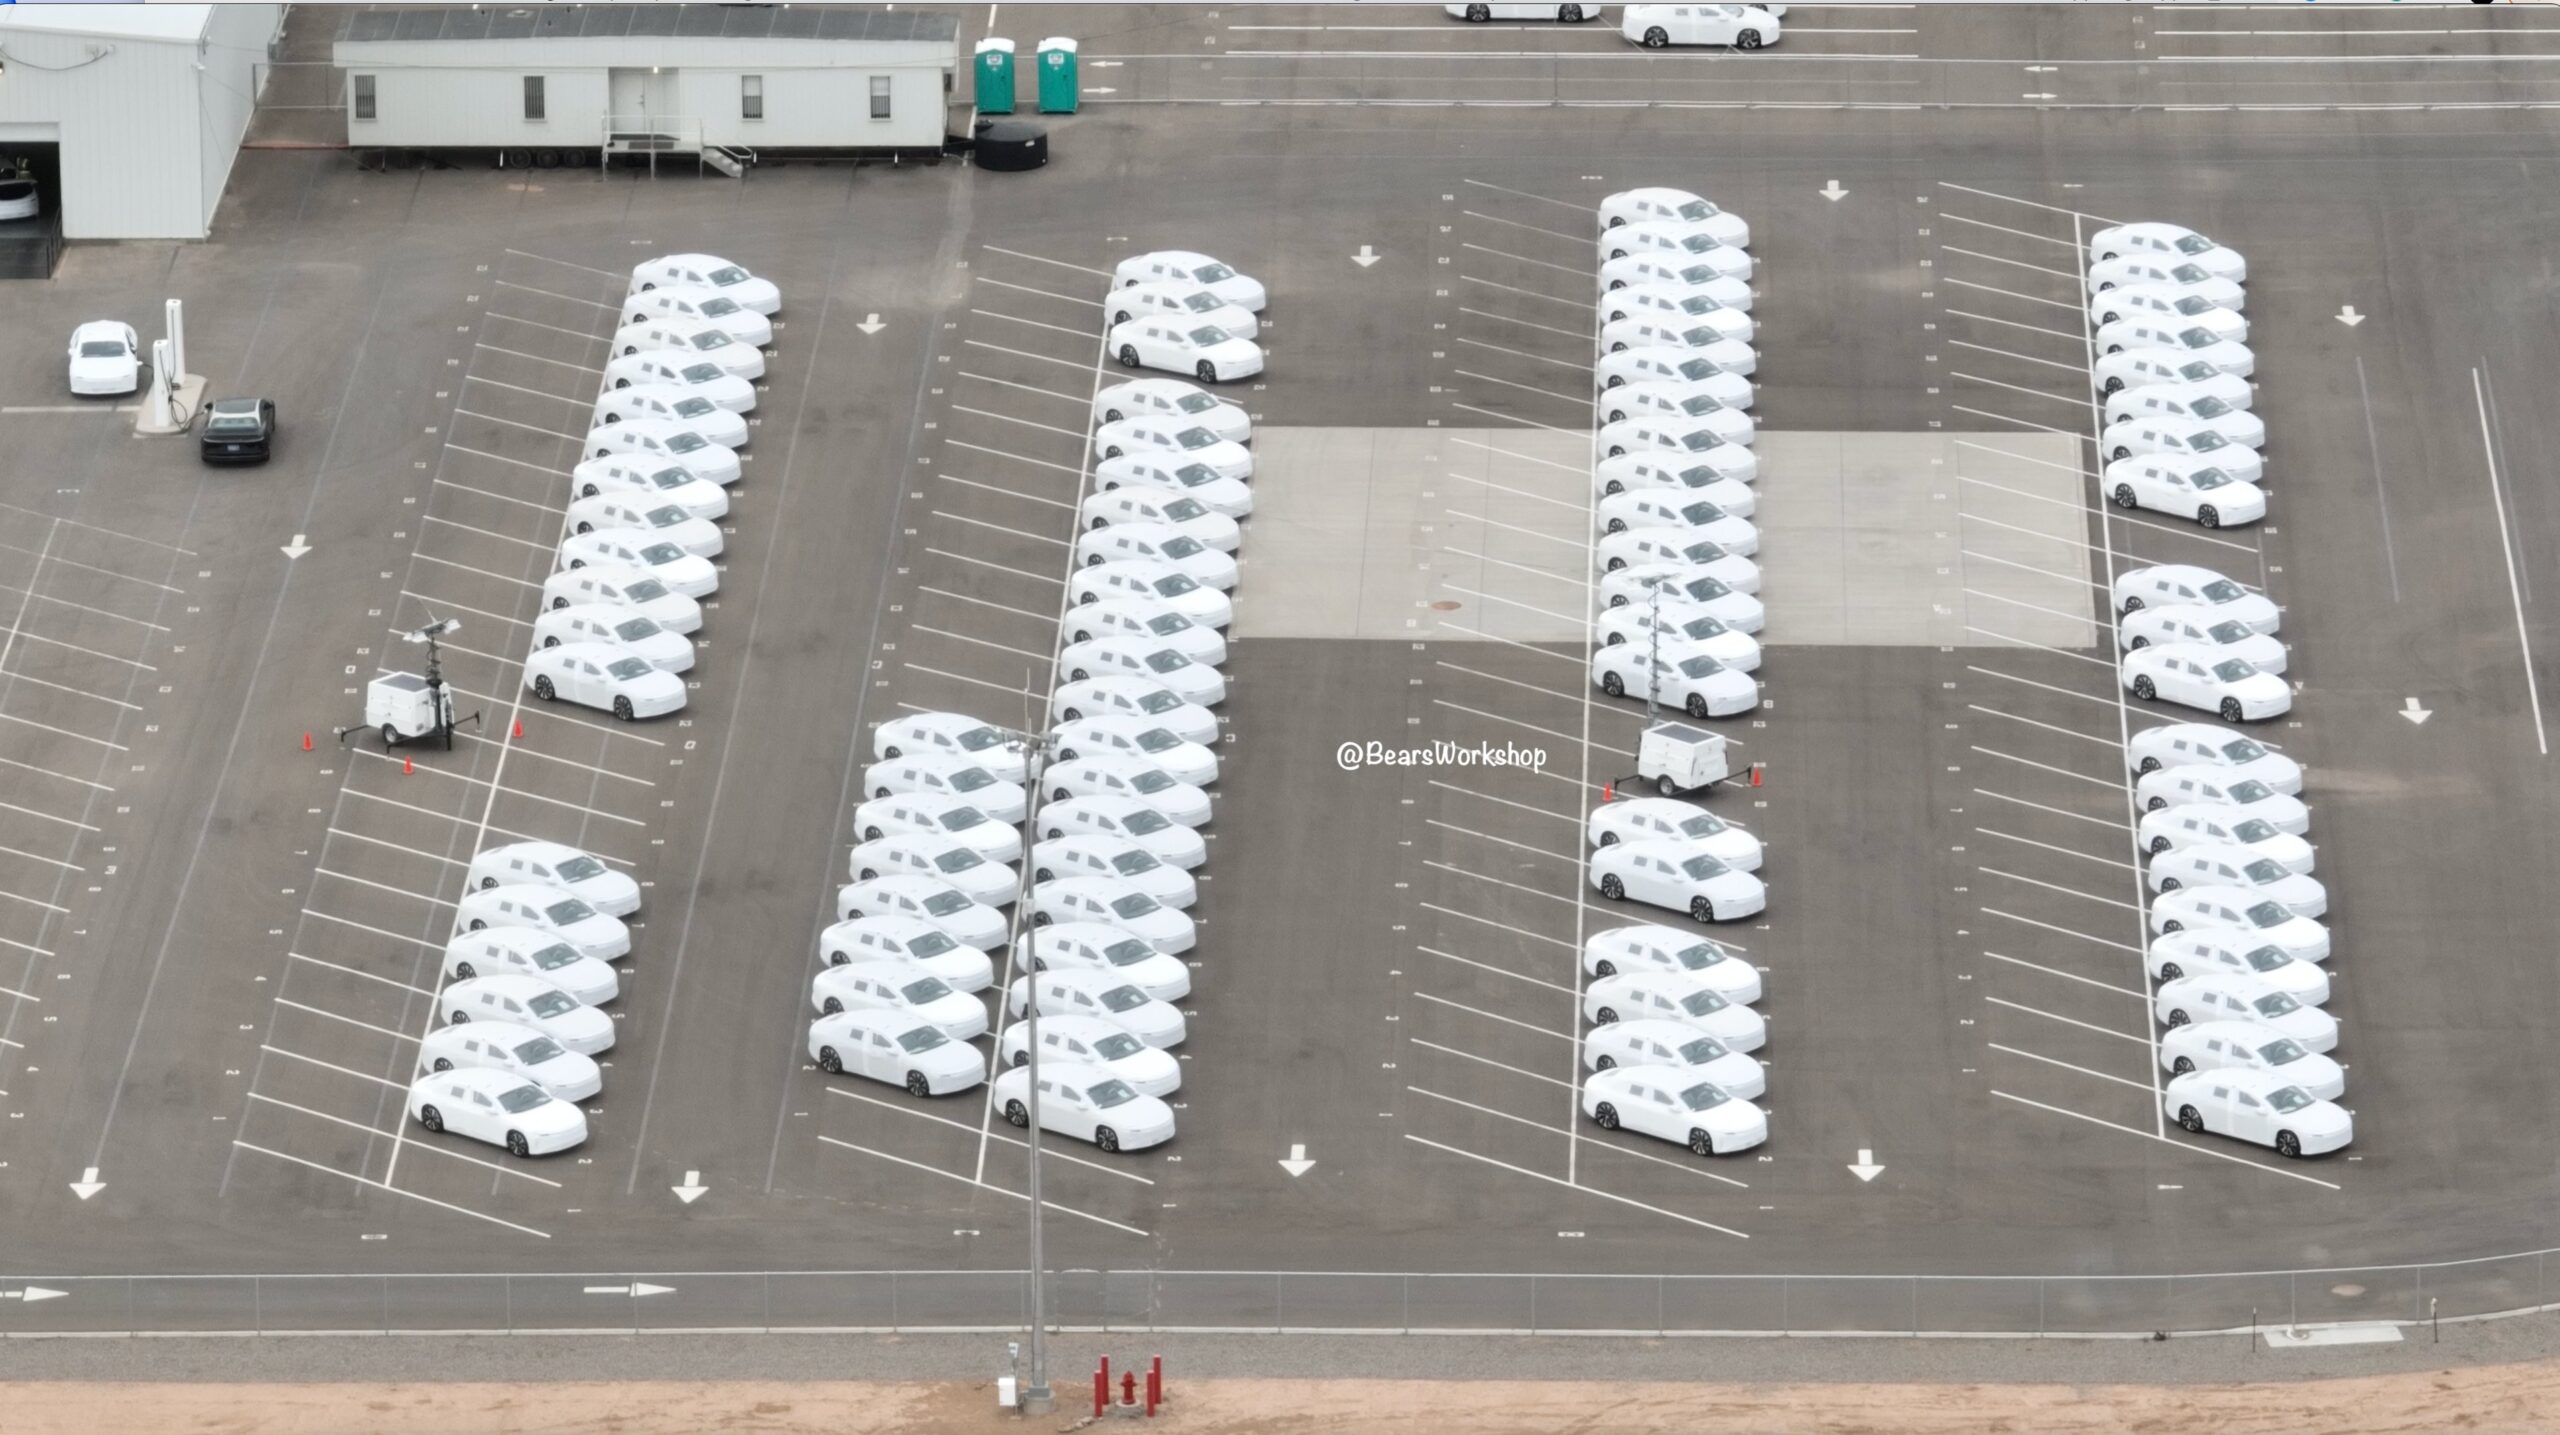 Lucid Motors Lot Filled With 100 Grand Touring Lucid Airs?